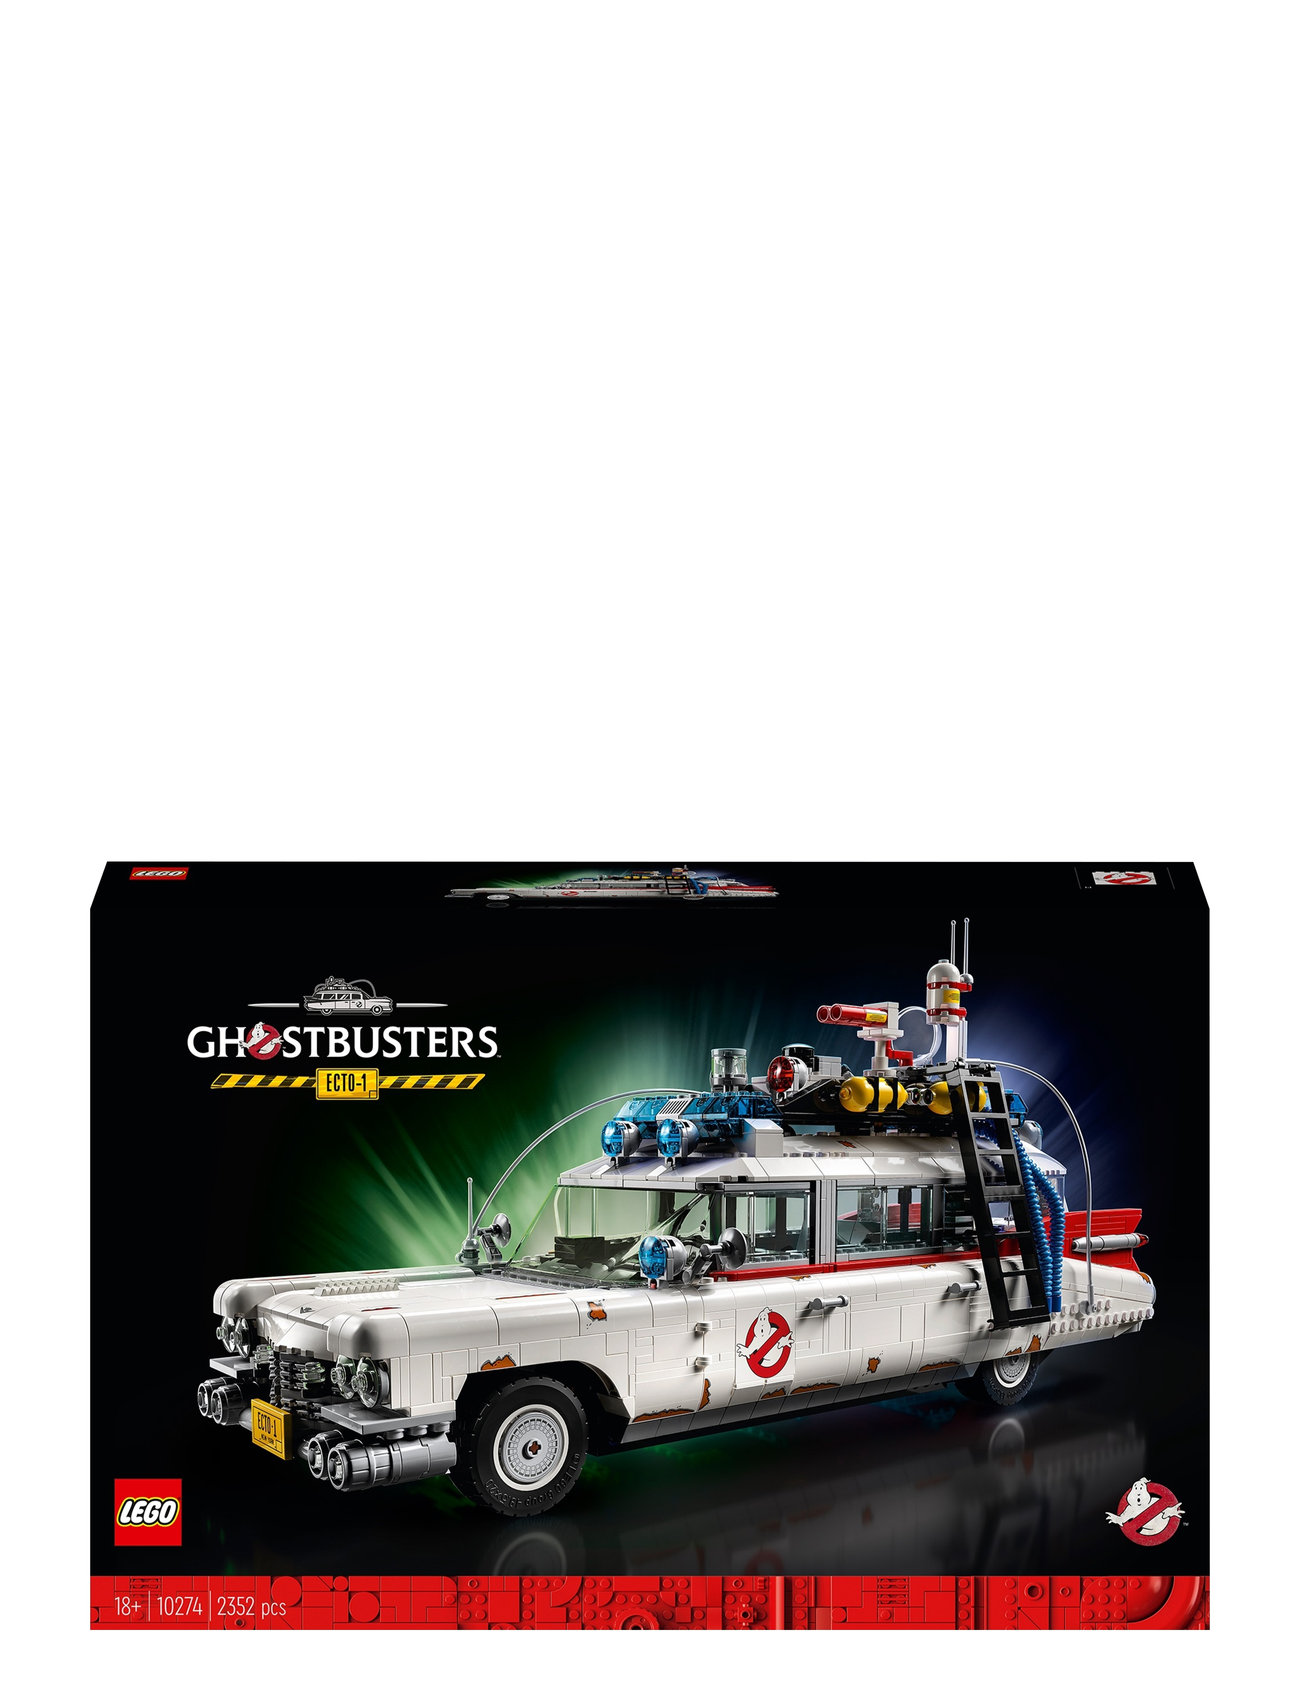 Ghostbusters Ecto-1 Car Set For Adults Toys Lego Toys Lego creator Multi/patterned LEGO